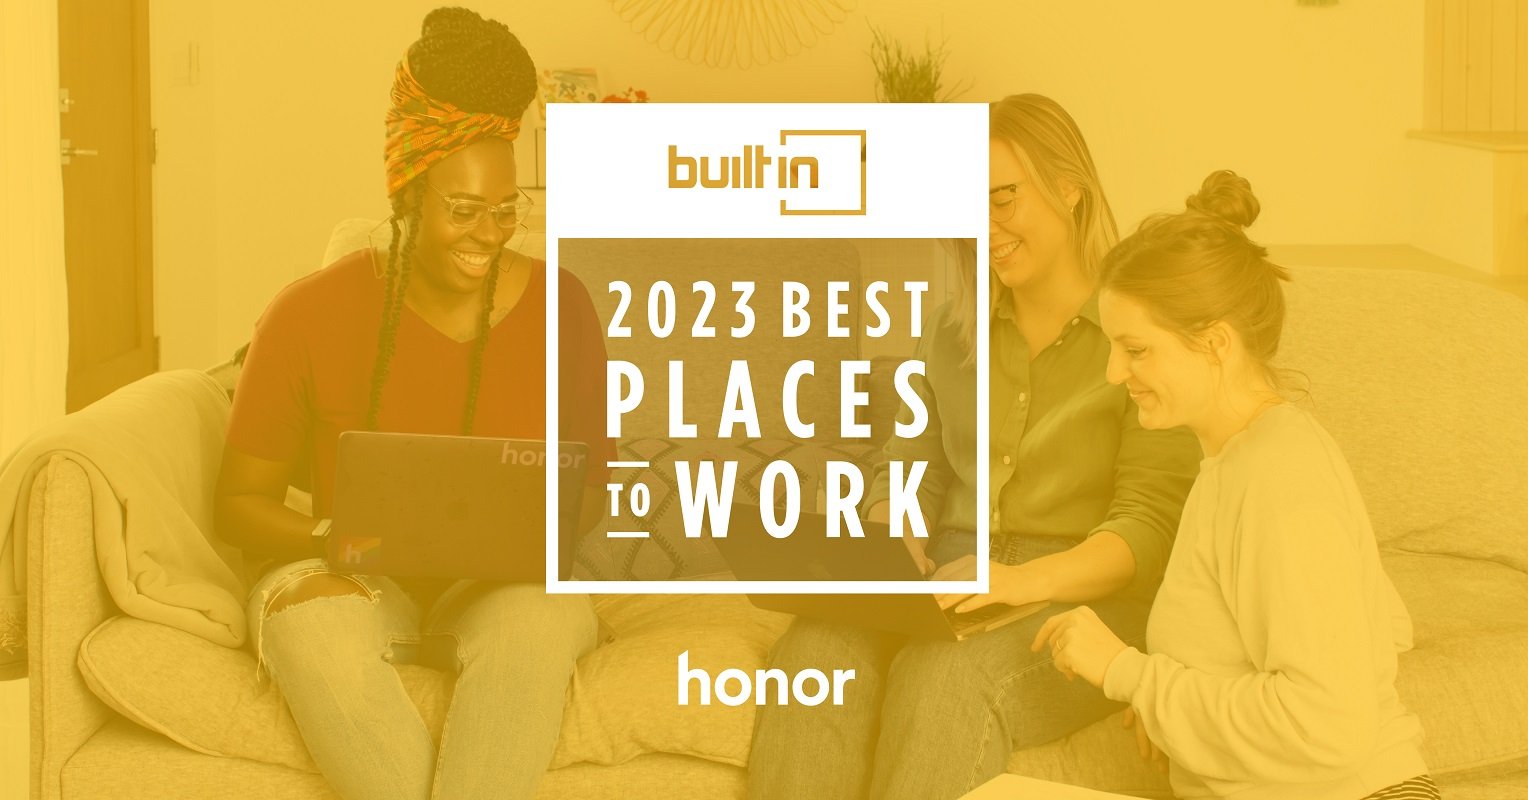 Honor is a 2023 Built In Best Place to Work